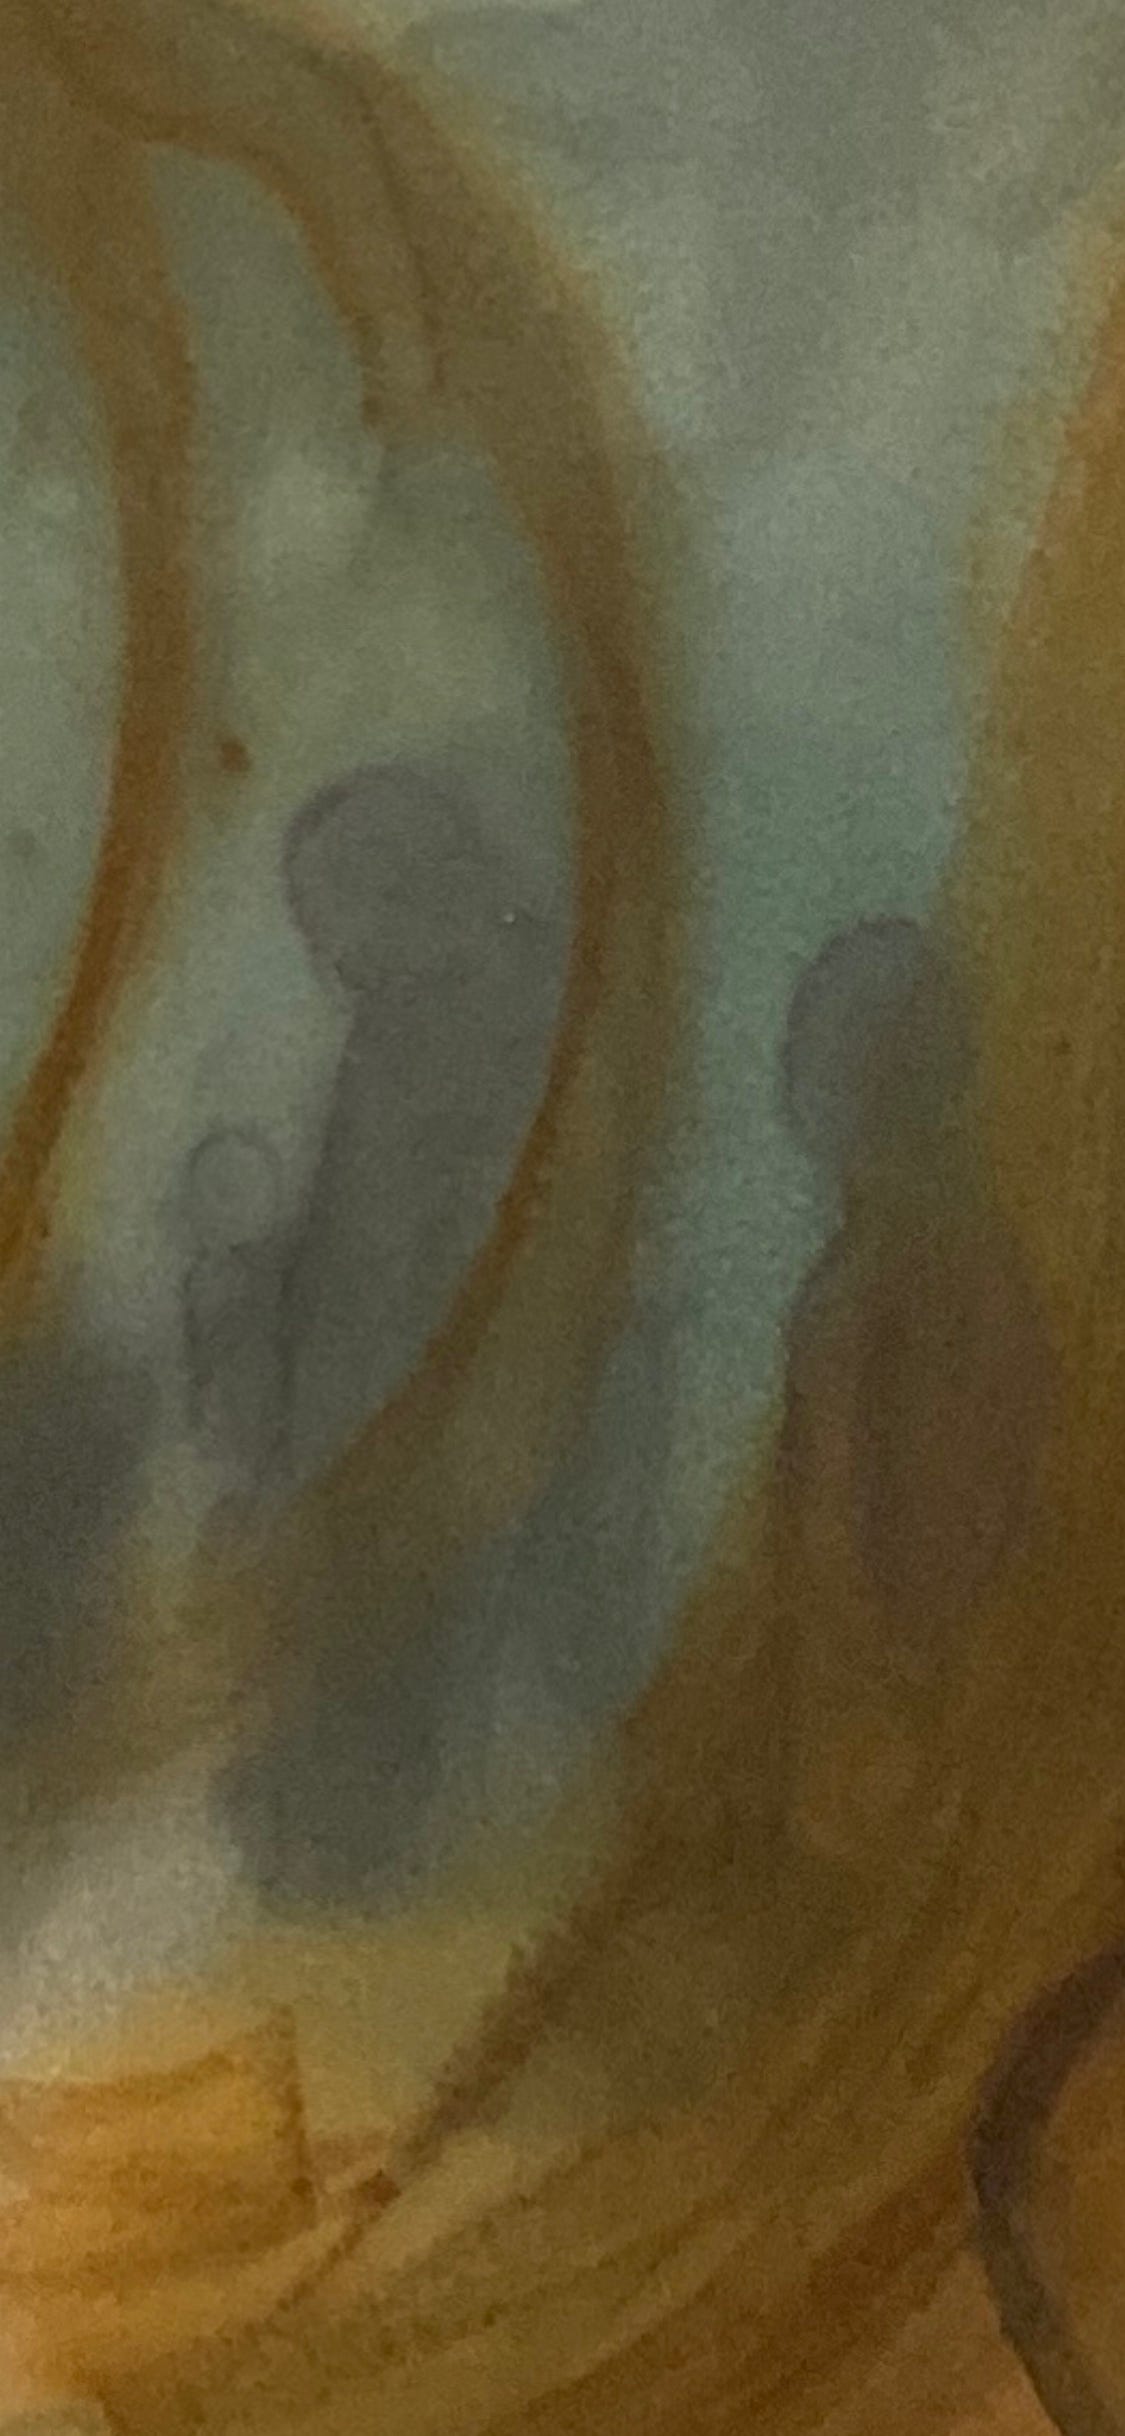 closeup of an image with three shadowy figures standing in a circular formation